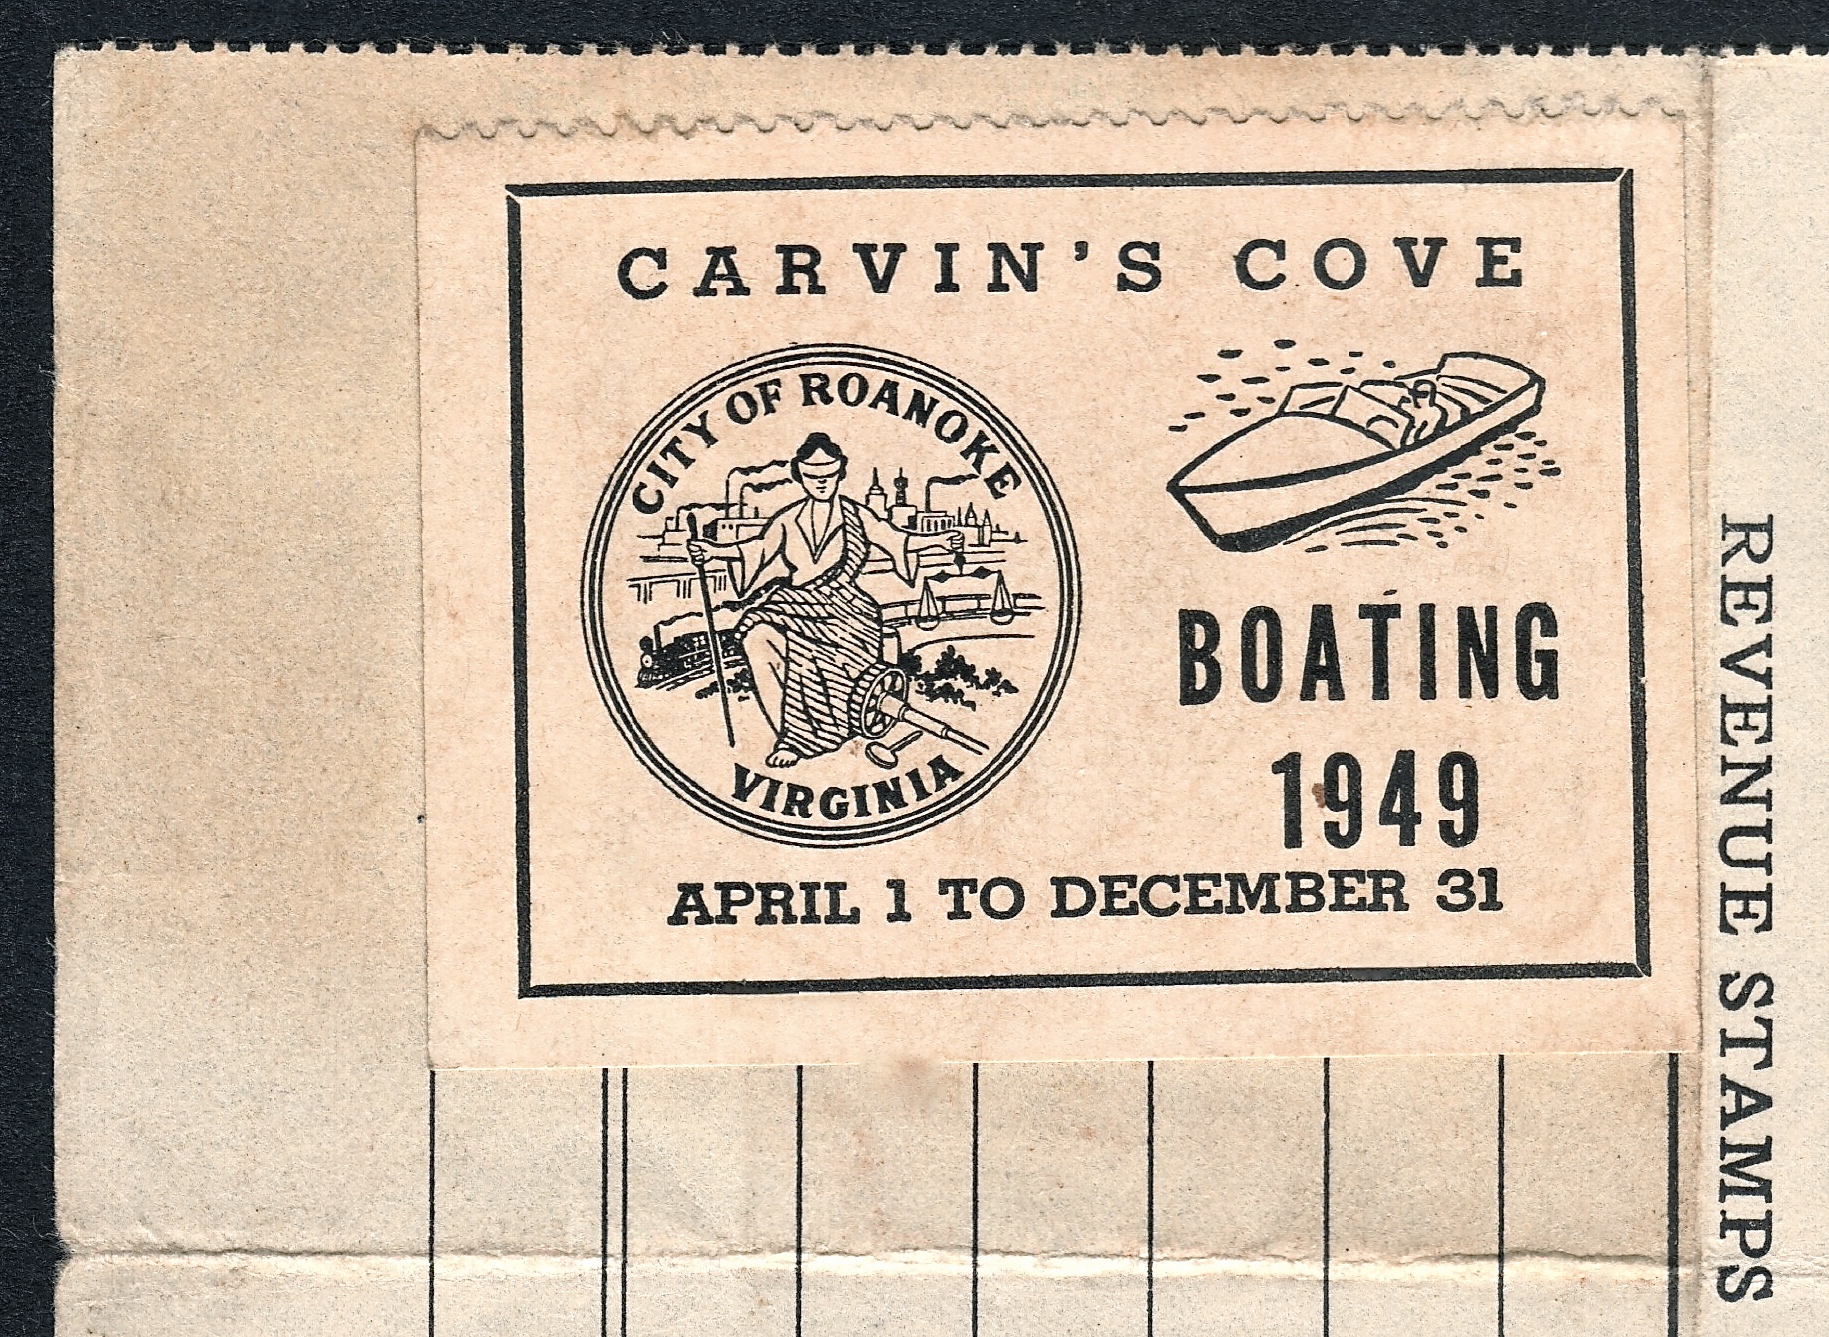 1949 Carvin's Cove Boating stamp, required to fish from a boat